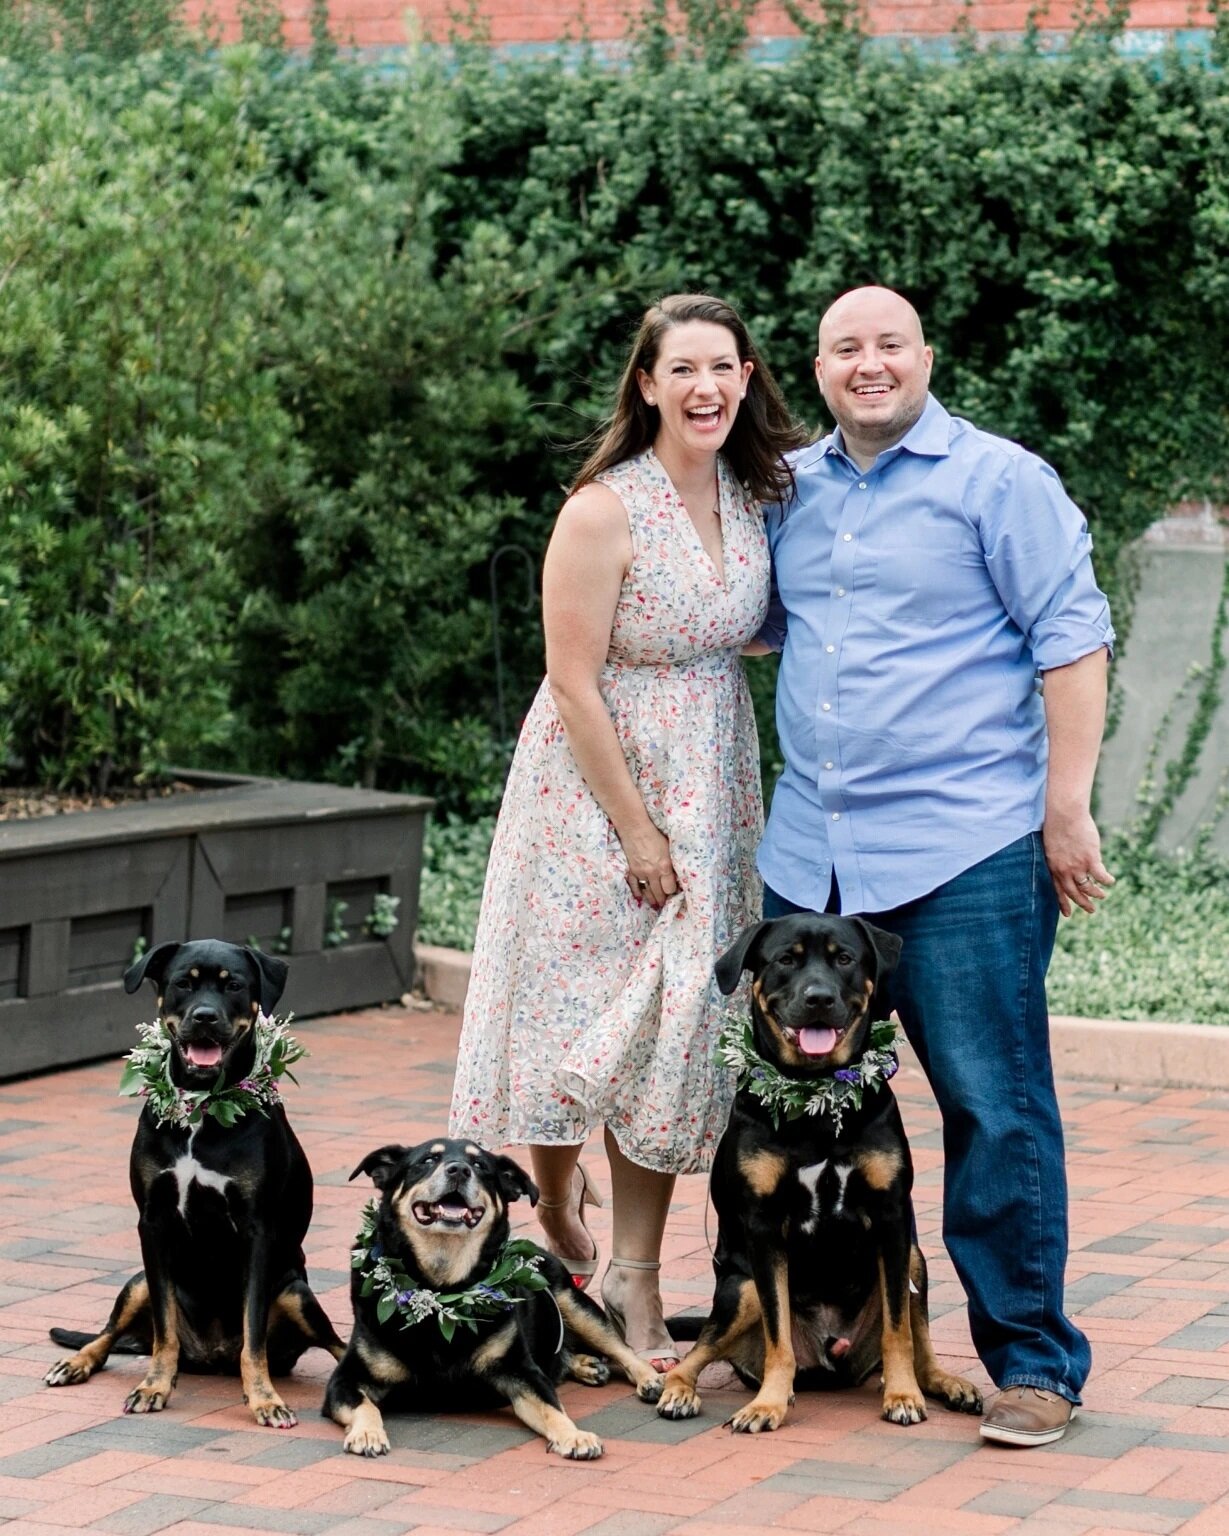 I don't think I've done a #fridayintroduction before but my family pictures came in so why not 💁&zwj;♀️
.
.
This is my little family: Albie and I have been together for 20+ years and married for 12 (don't do the math, I'll feel old). I'm a proud res